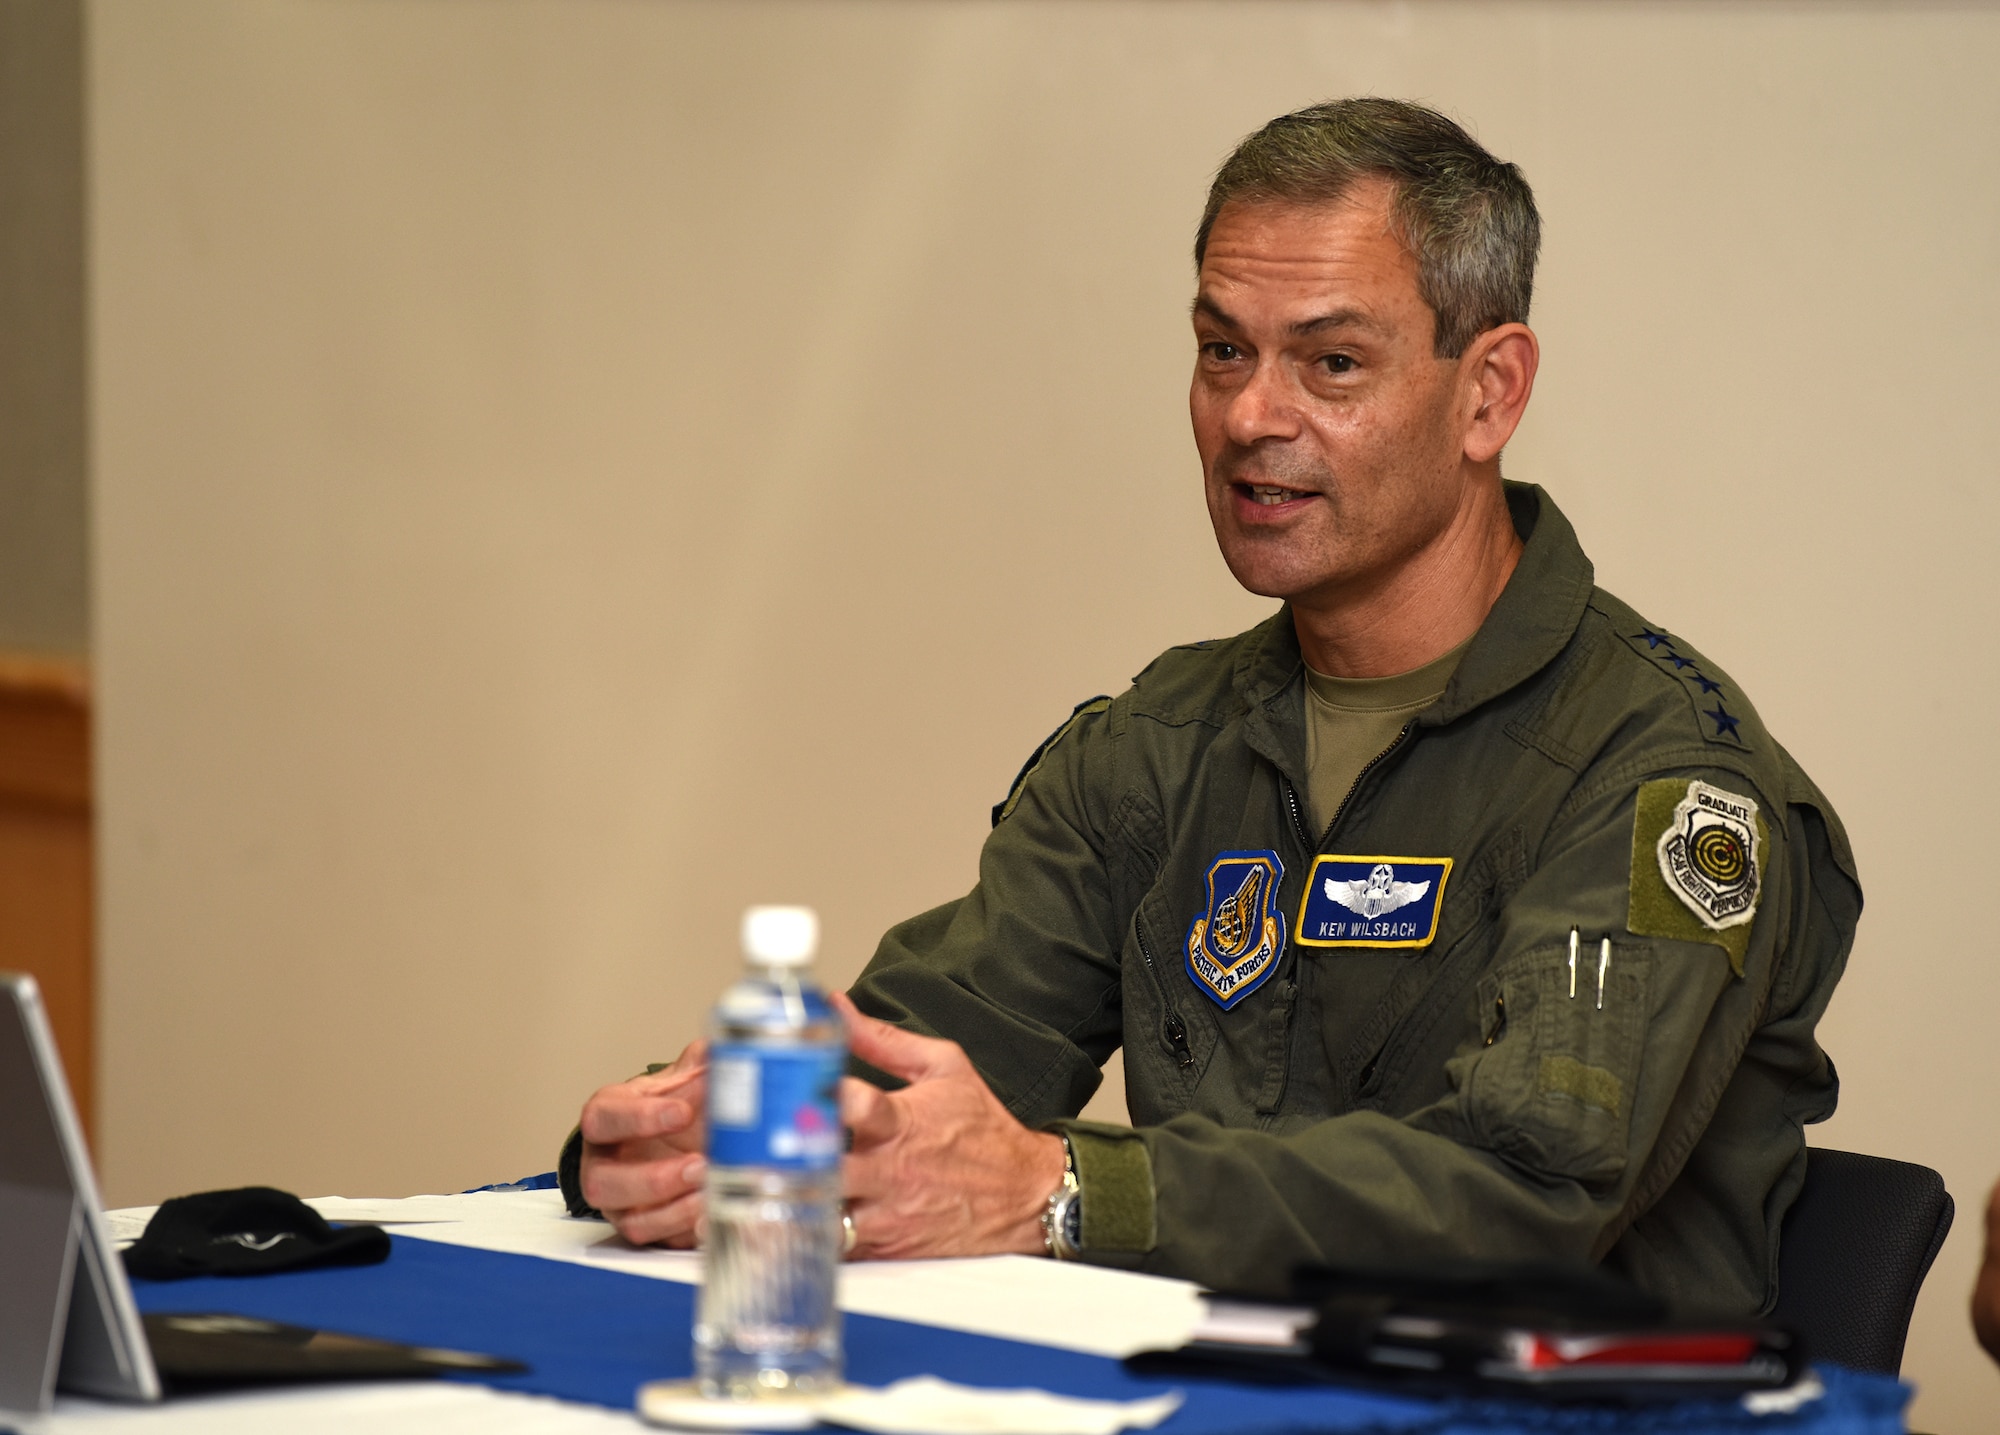 U.S. Air Force Gen. Ken Wilsbach, Pacific Air Forces (PACAF) commander, discuss command priorities with Airmen from around the Pacific during Pacific Paladin at the Aloha Conference Center, Joint Base Pearl Harbor-Hickam, Hawaii, March 31, 2021. Pacific Paladin, a new PACAF professional development platform focused on mentoring staff sergeants through senior master sergeants, bridging the gap between the tactical, operational and strategic level of performance. More than 200 Airmen from nine PACAF installations attended the seminar in-person and virtually. (U.S. Air Force photo by Tech. Sgt. Zachary Vaughn)